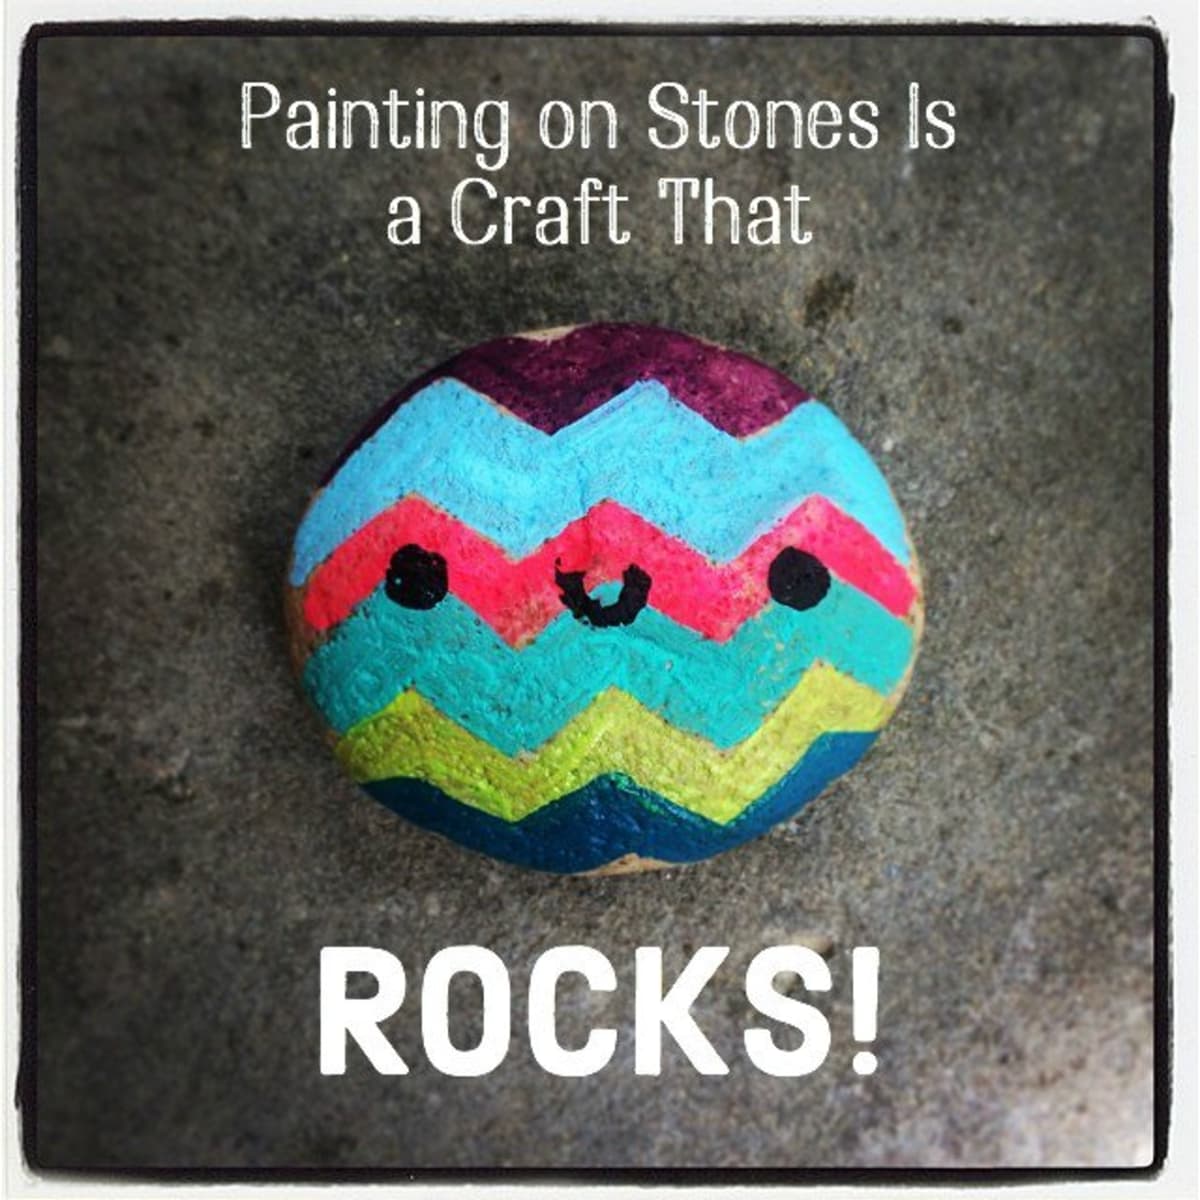 15 smooth and creative stones to paint for kindness rocks and kids art projects Keep them or give them as gifts.